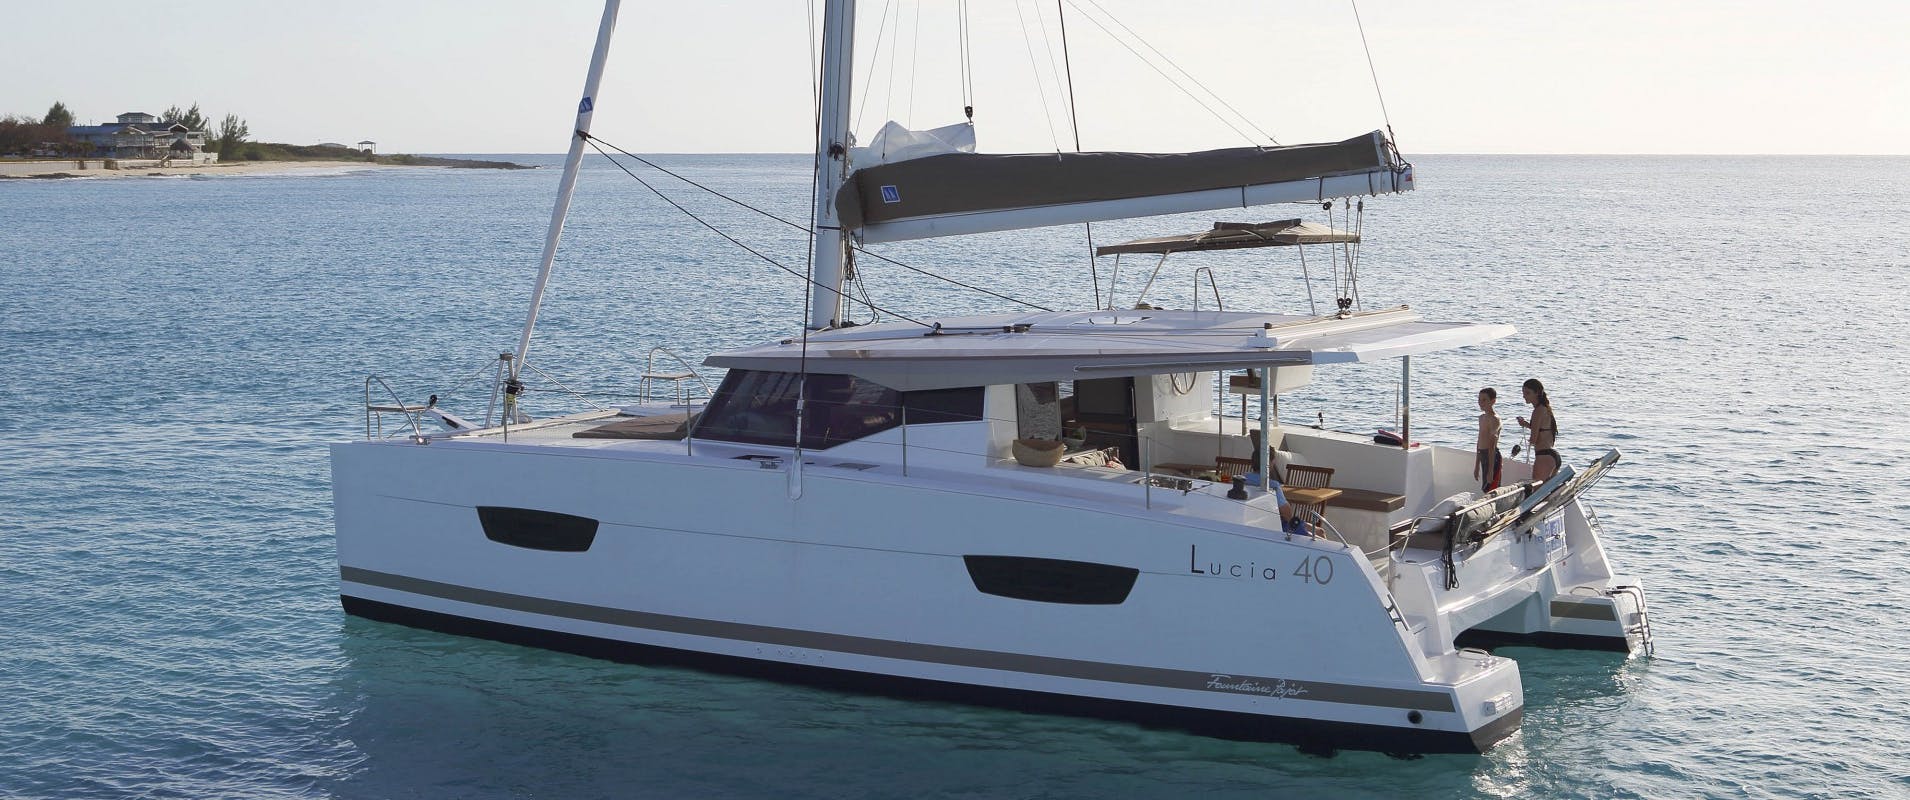 Book Fountaine Pajot Lucia 40 Catamaran for bareboat charter in Rhodes New Marina, Dodecanese, Greece with TripYacht!, picture 1